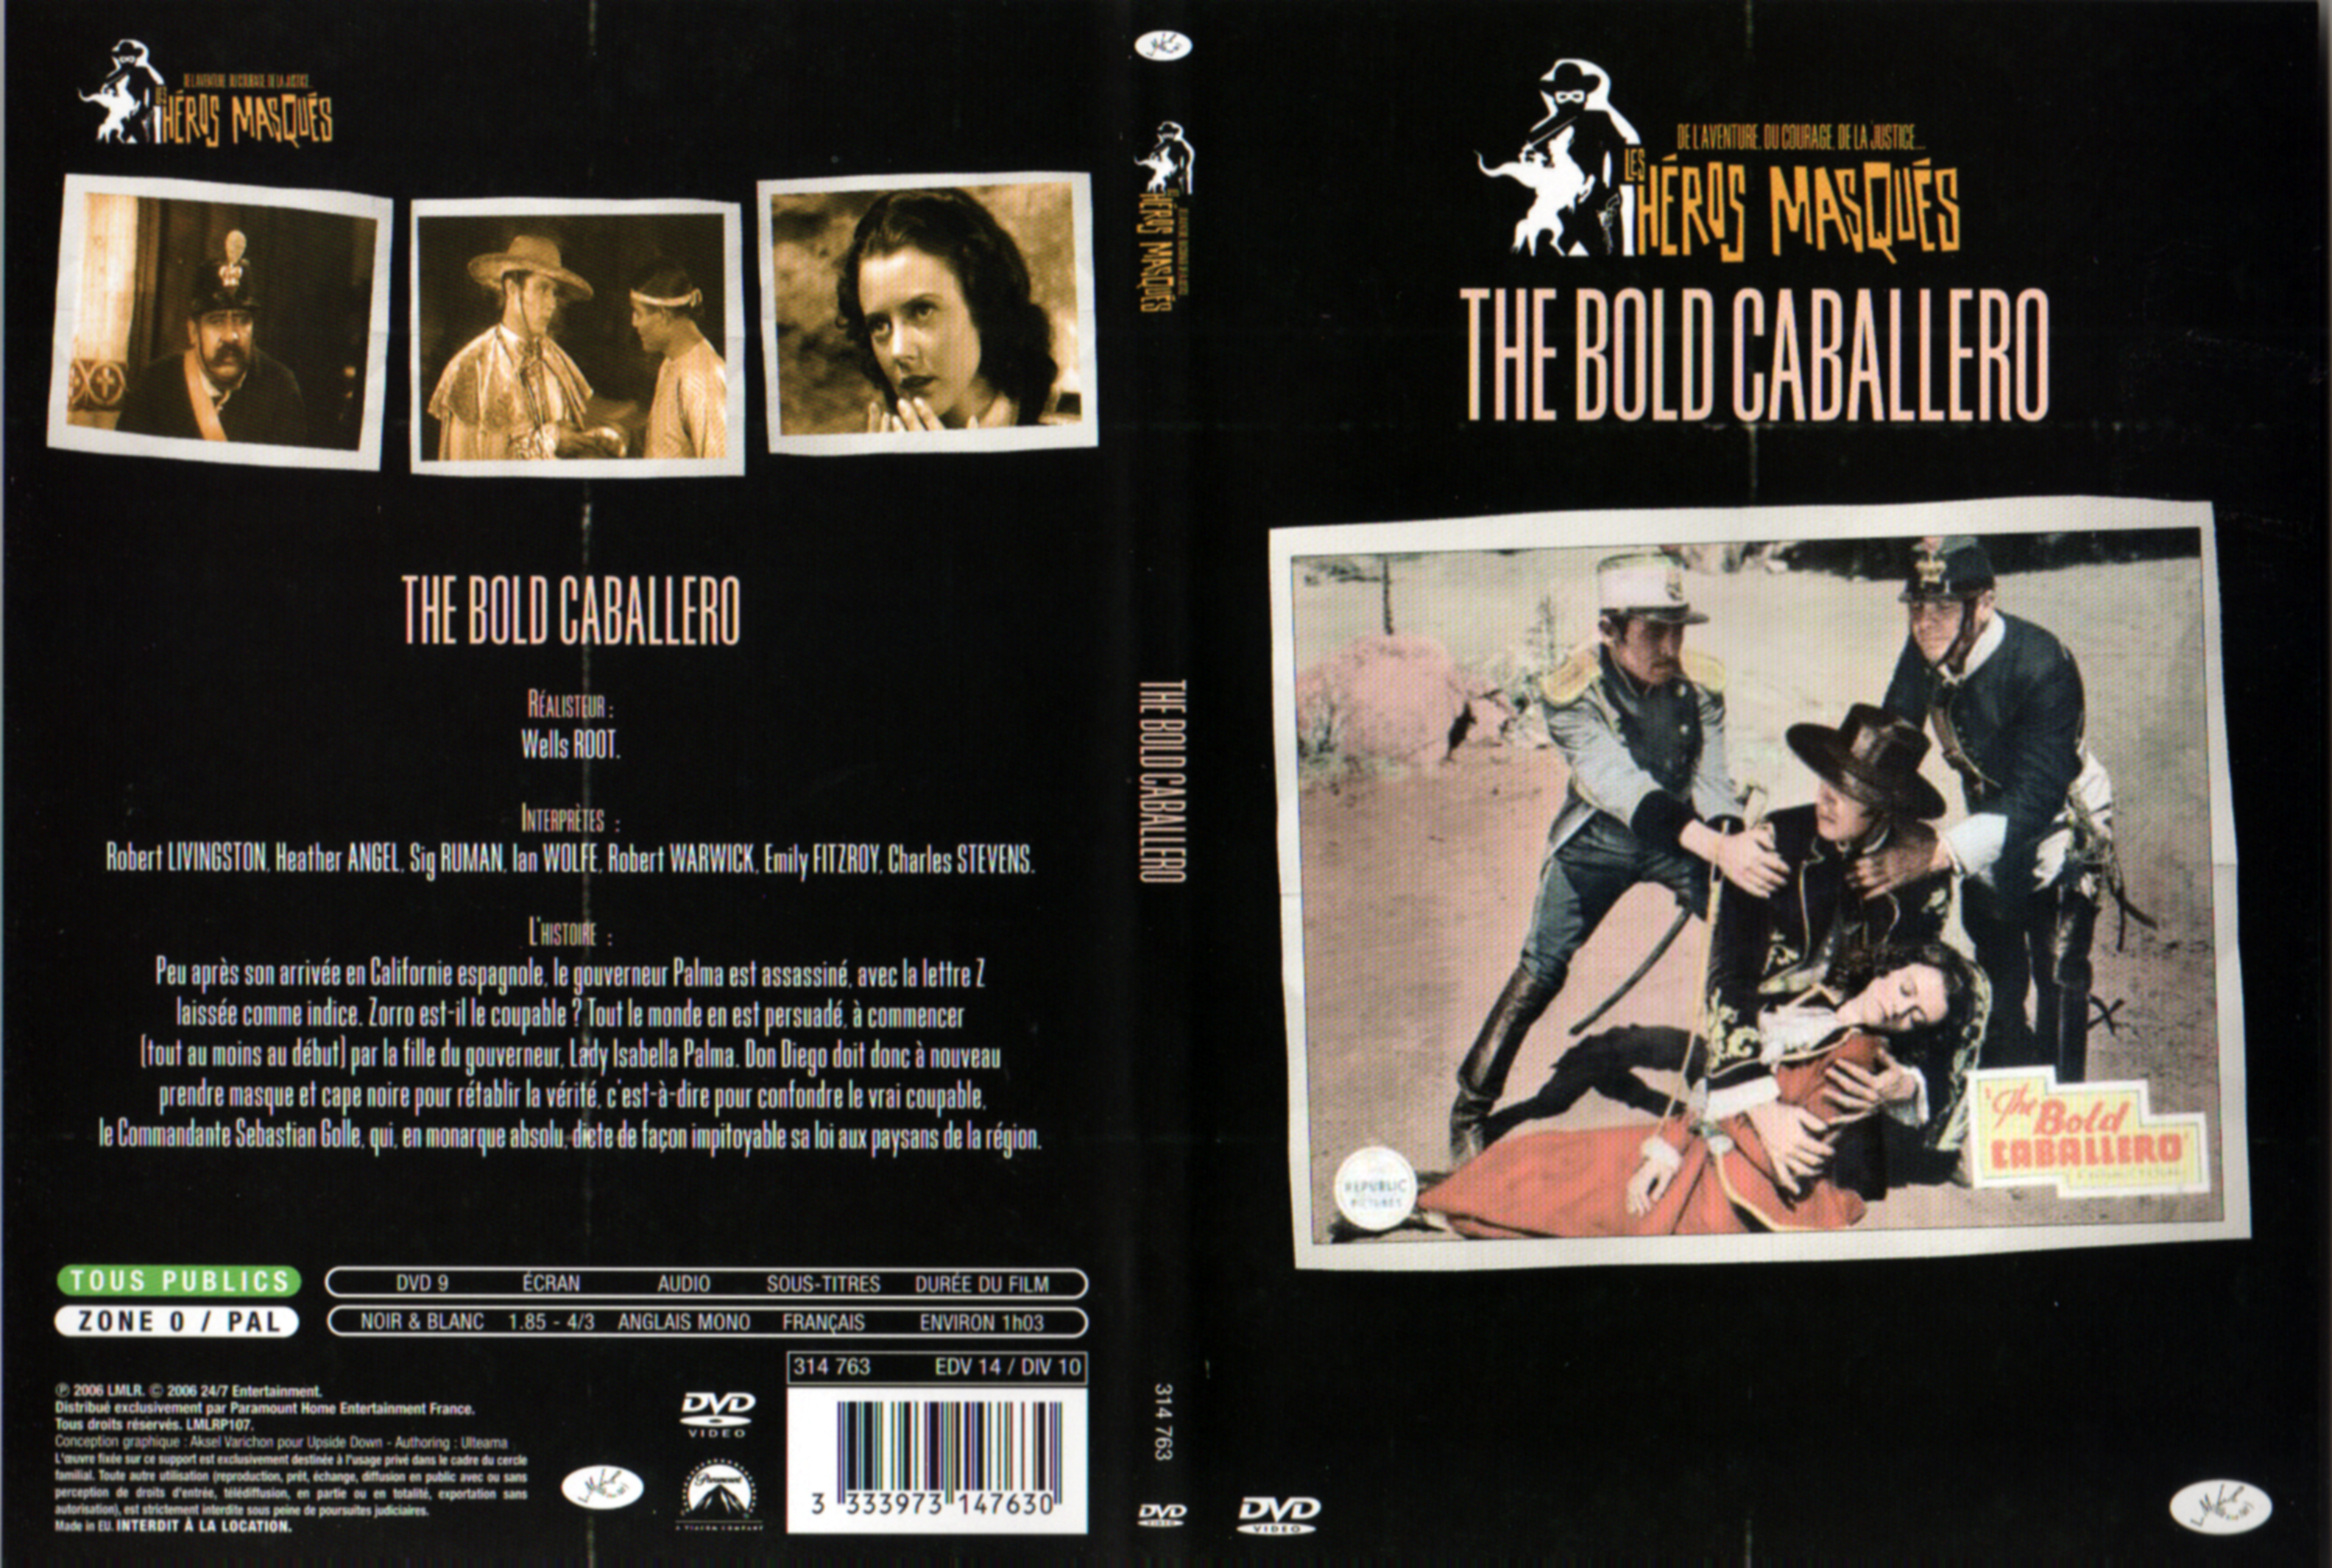 Jaquette DVD The bold caballero